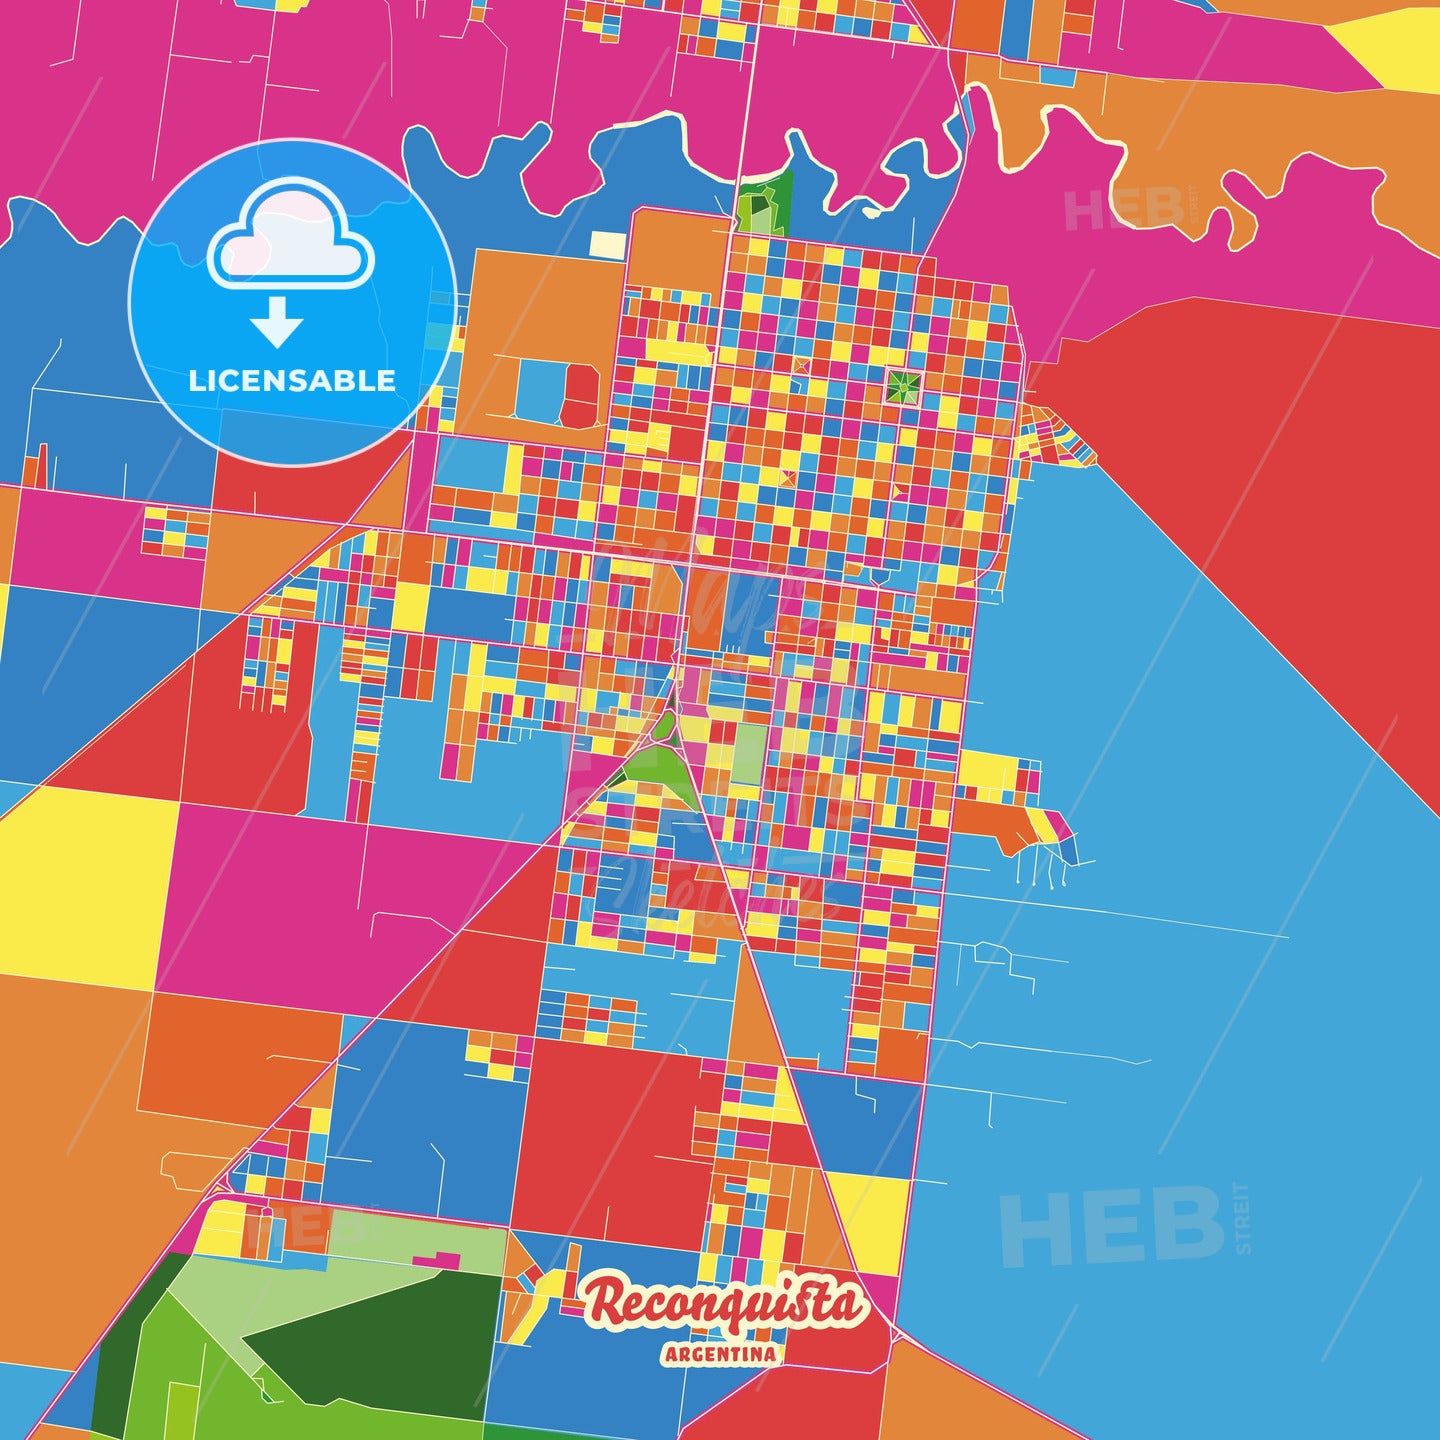 Reconquista, Argentina Crazy Colorful Street Map Poster Template - HEBSTREITS Sketches